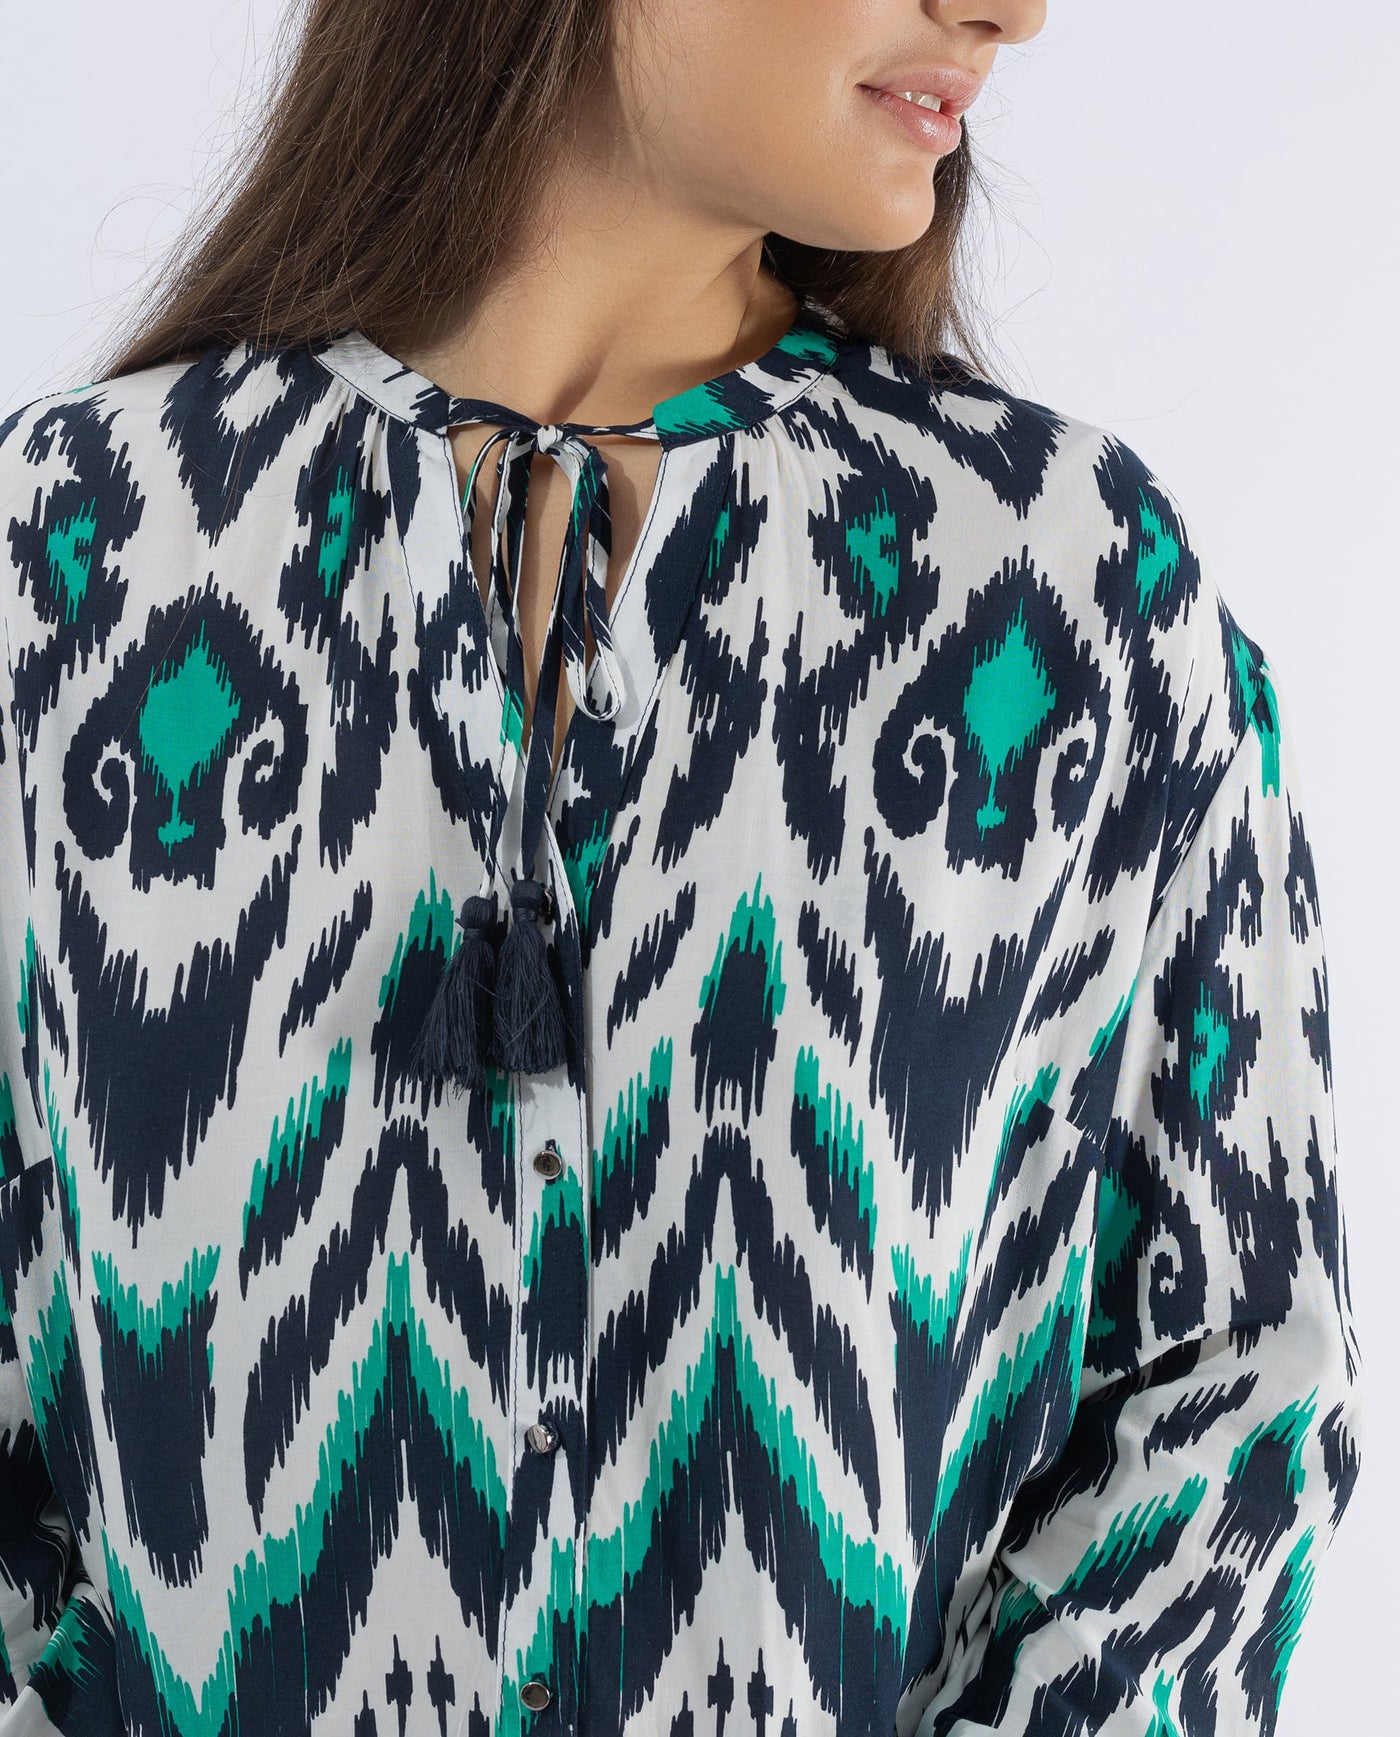 IKAT PRINTED BLOUSE WITH CUFF DETAILS, DARK BLUE